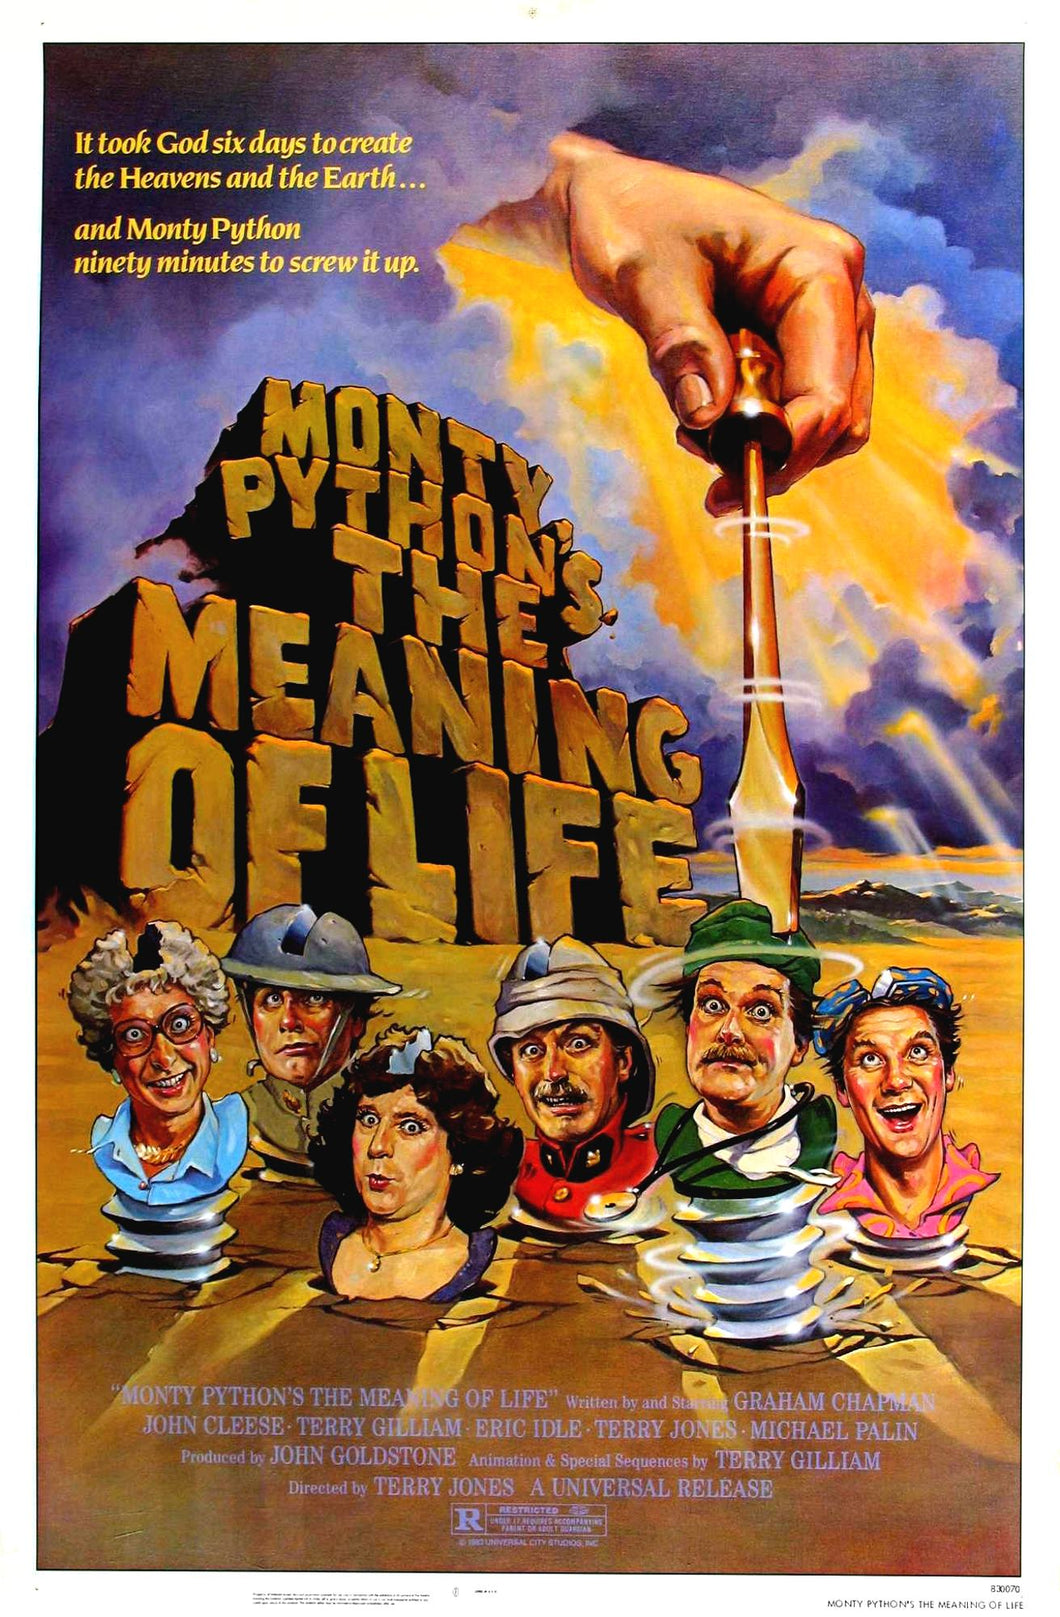 Monty Python's Meaning Of Life Movie Poster Framed or Unframed Glossy Poster Free UK Shipping!!!